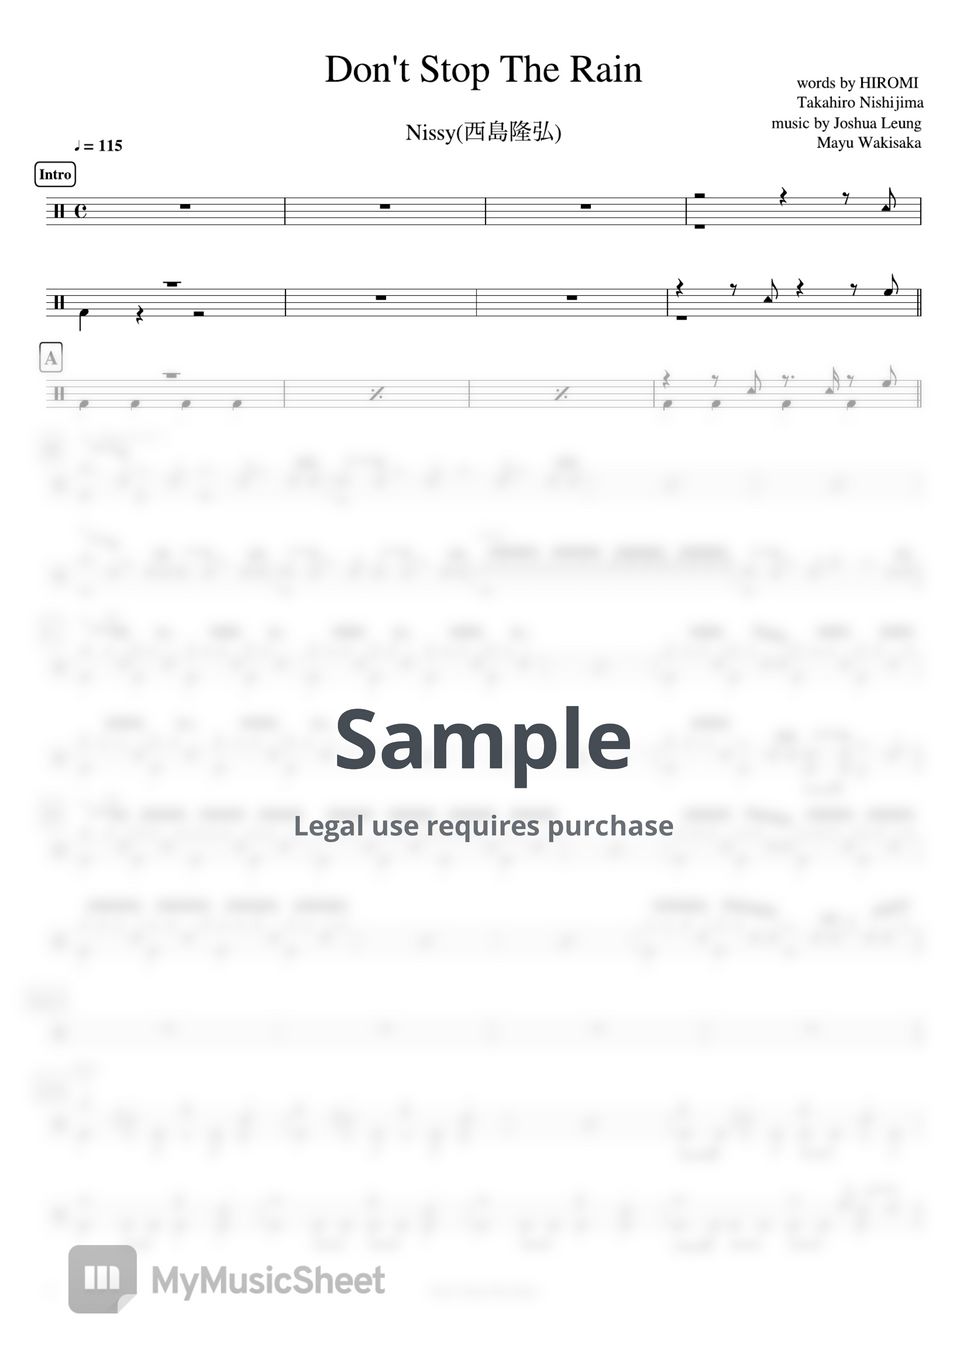 Nissy - Don't Stop The Rain by Cookai's J-pop Drum sheet music!!!